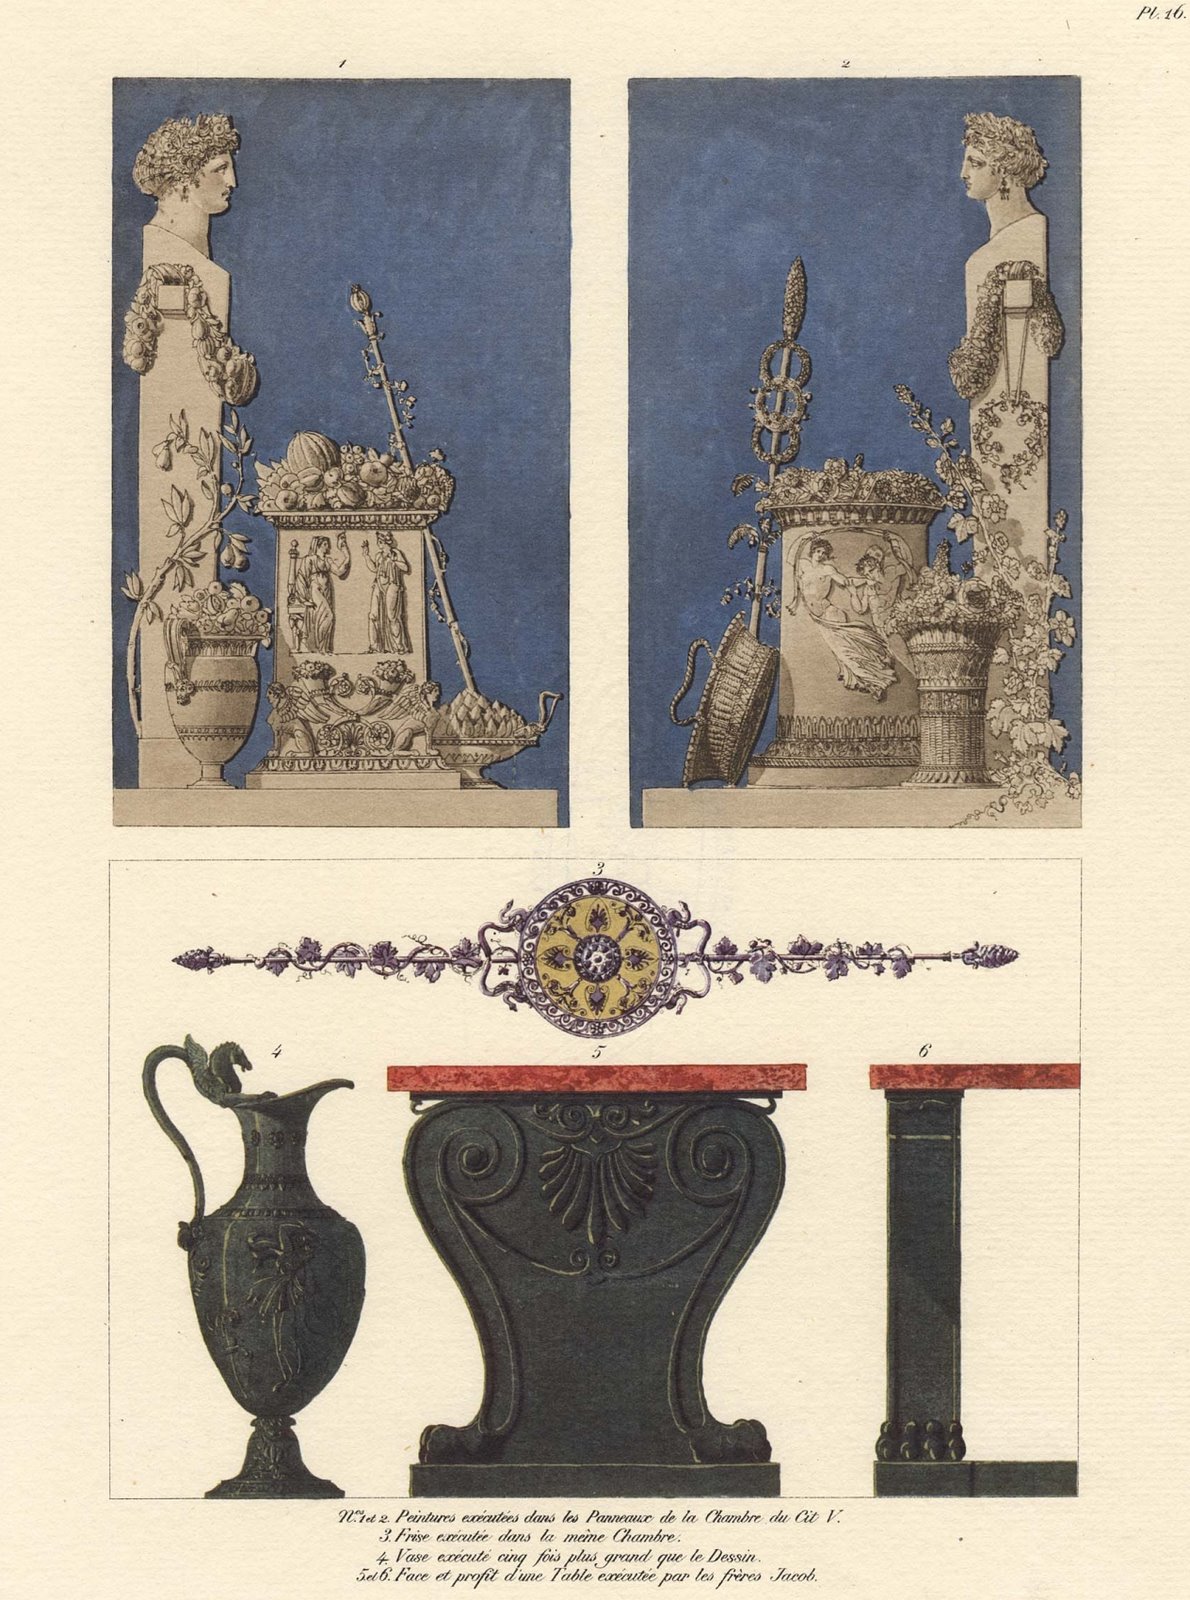 painting, frieze and vase designs